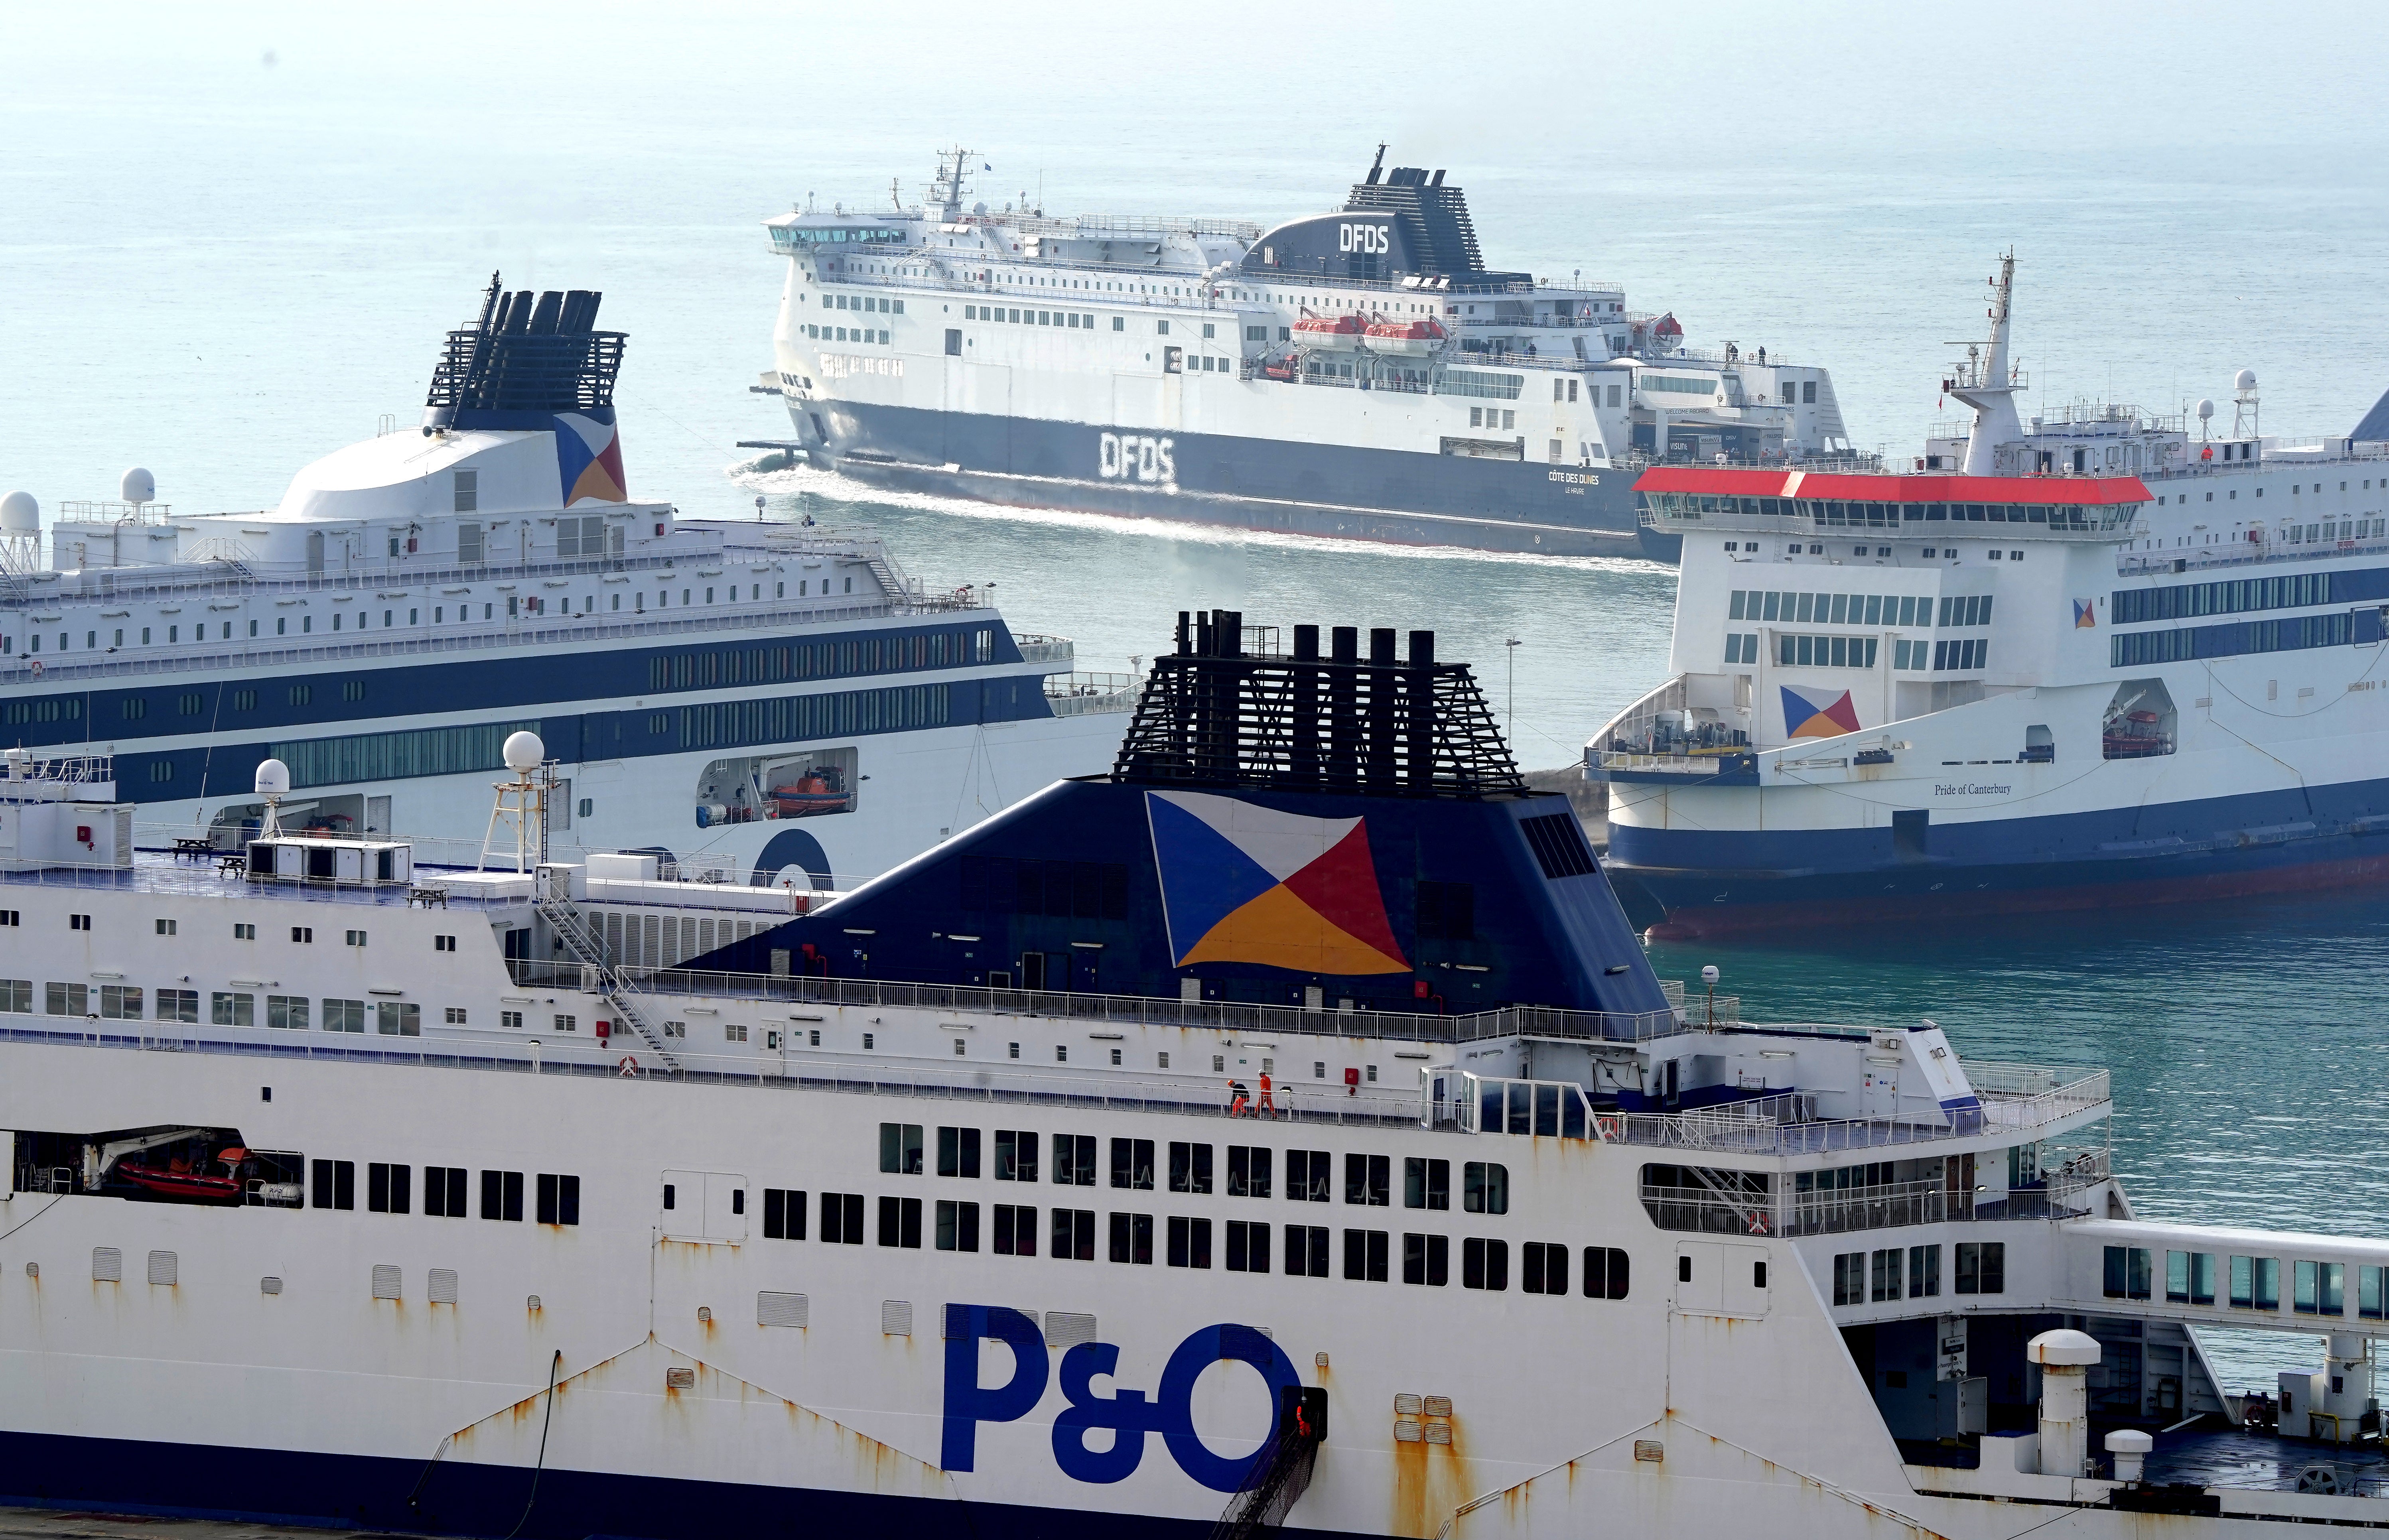 P&O Ferries suspended most of its sailings after the sackings